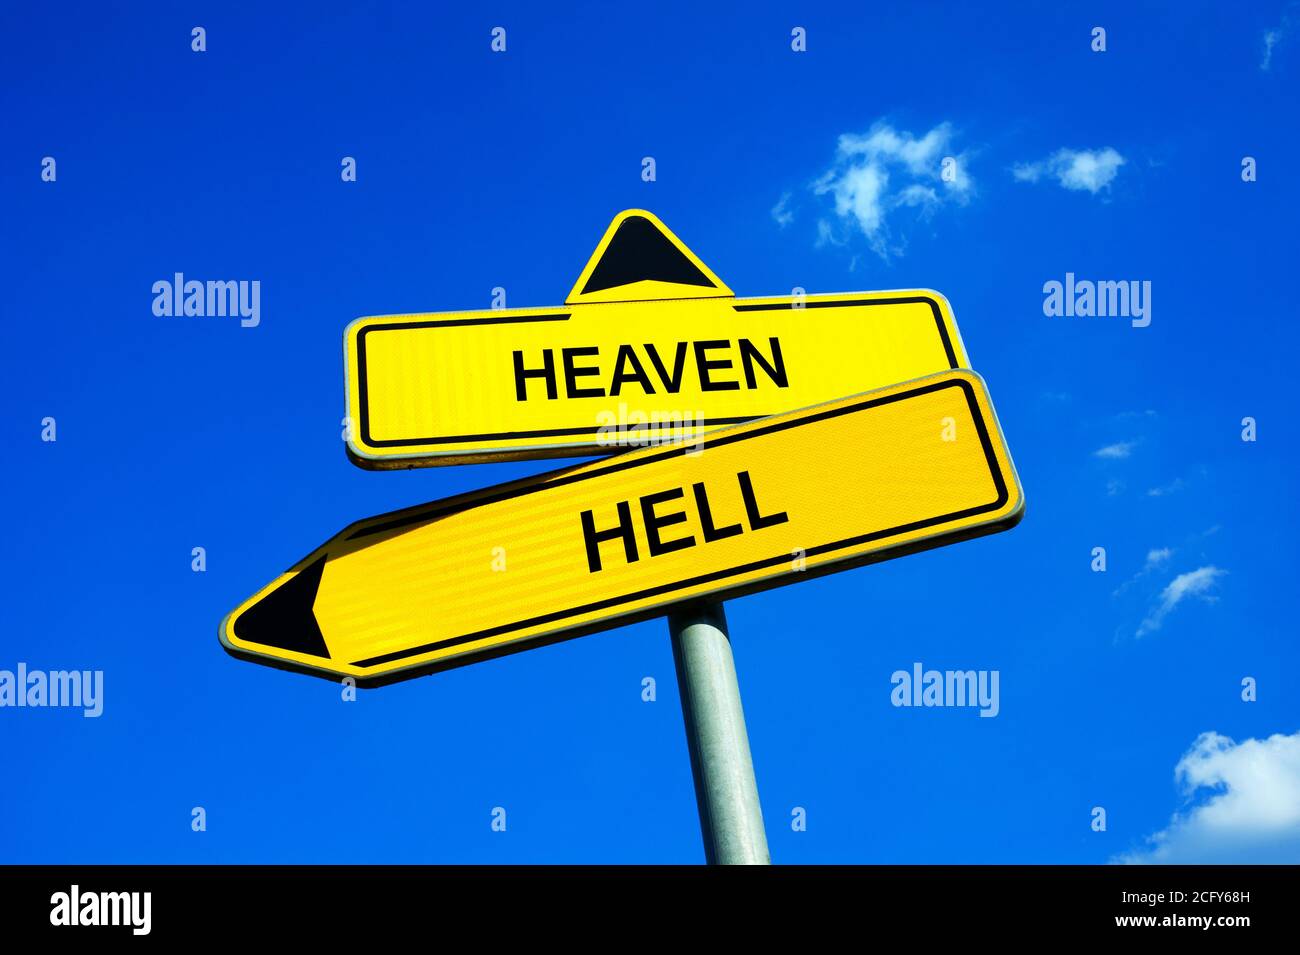 Heaven or Hell - Traffic sign with two options. Religious afterlife reward / punishment based on good, evil, sins. Eternal salvation of damnation. Stock Photo